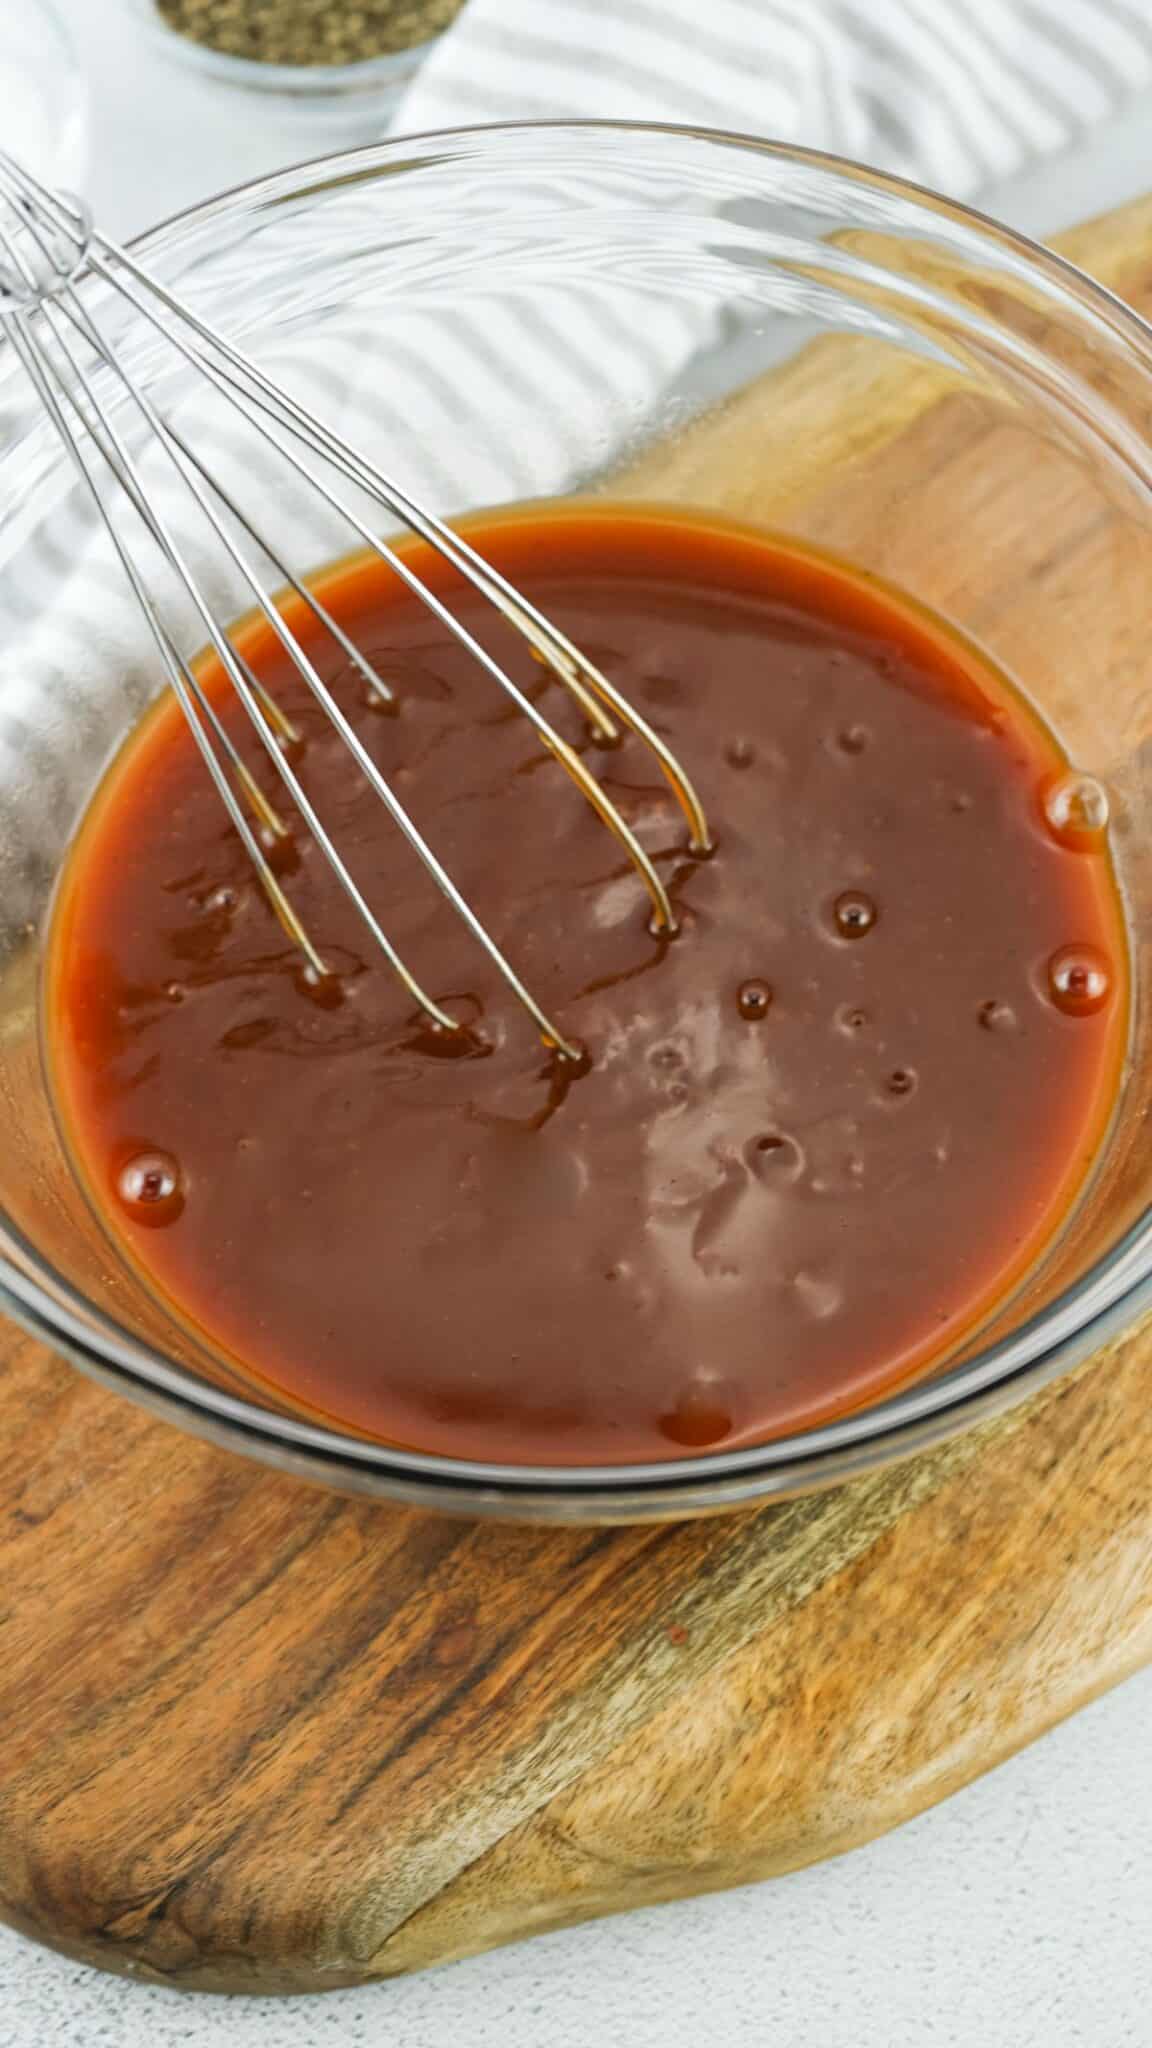 Sauce for glazing in a mixing bowl with whisk in it.